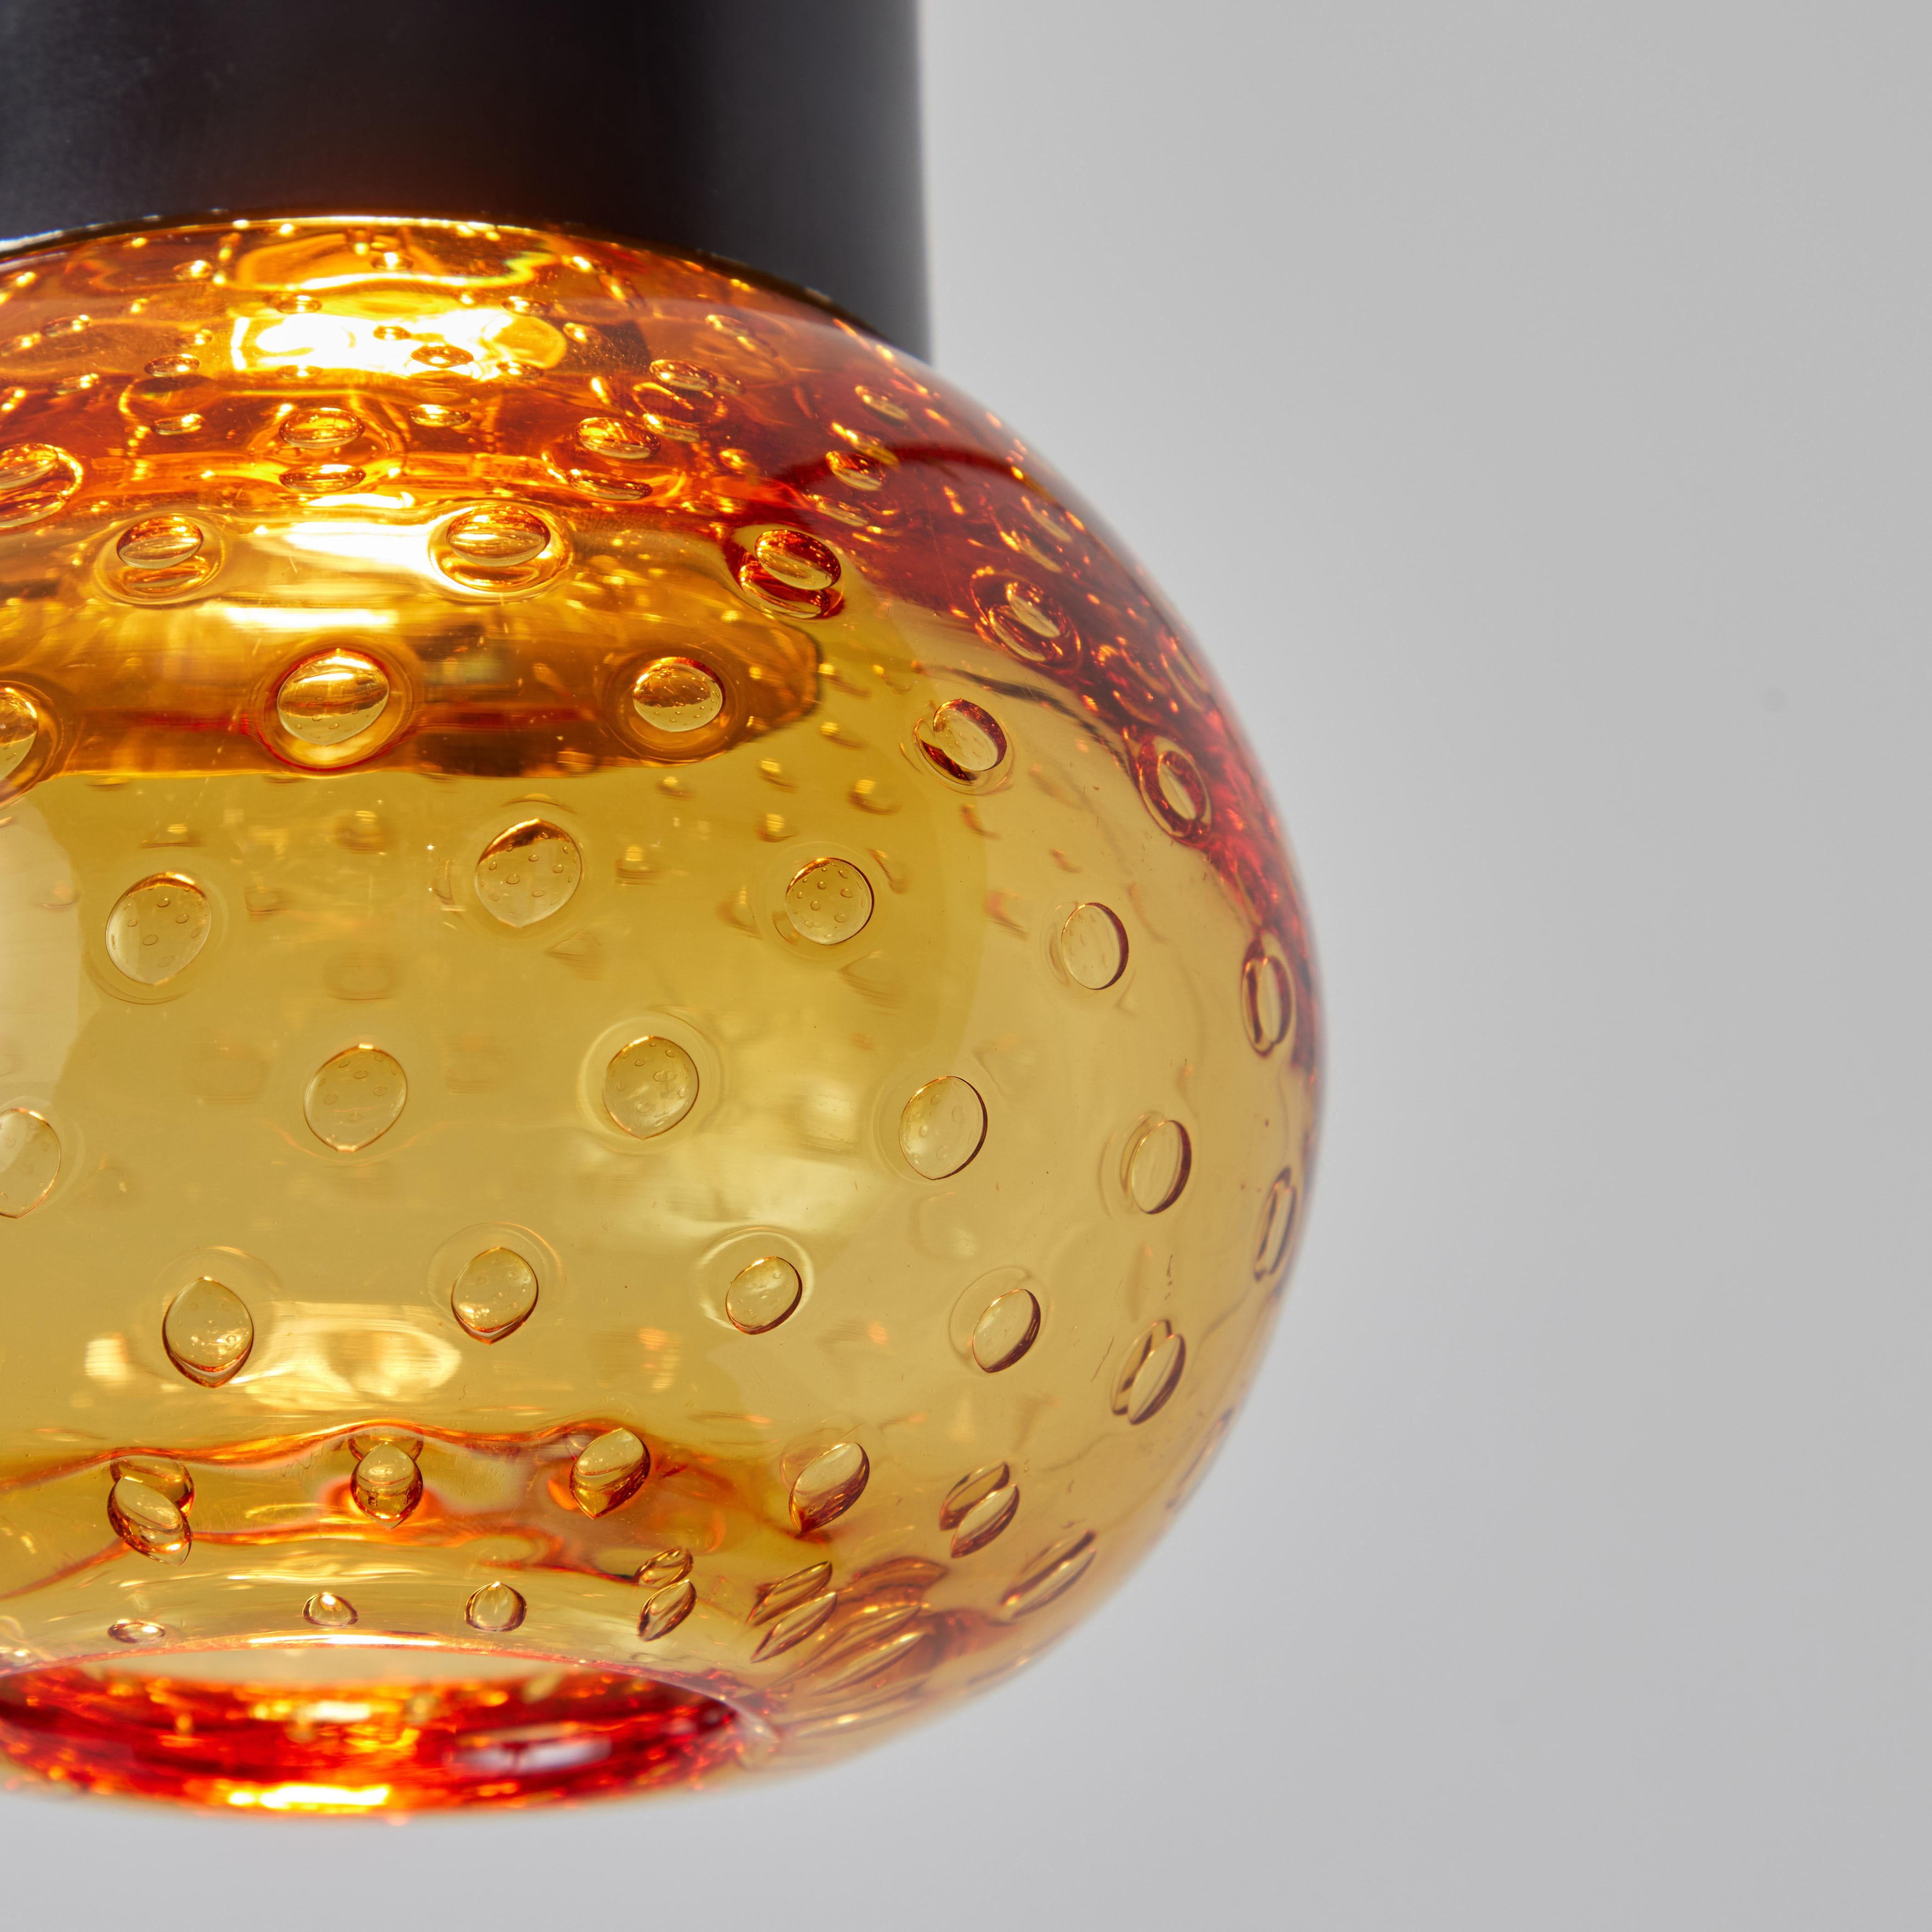 1960s Gino Sarfatti Metal and Amber Seguso Glass Pendant for Arteluce. Executed in hand blown deep amber bubbled Seguso glass and painted metal. The simplicity of Sarfatti's design and the sculptural shaping of the materials make for an incredibly